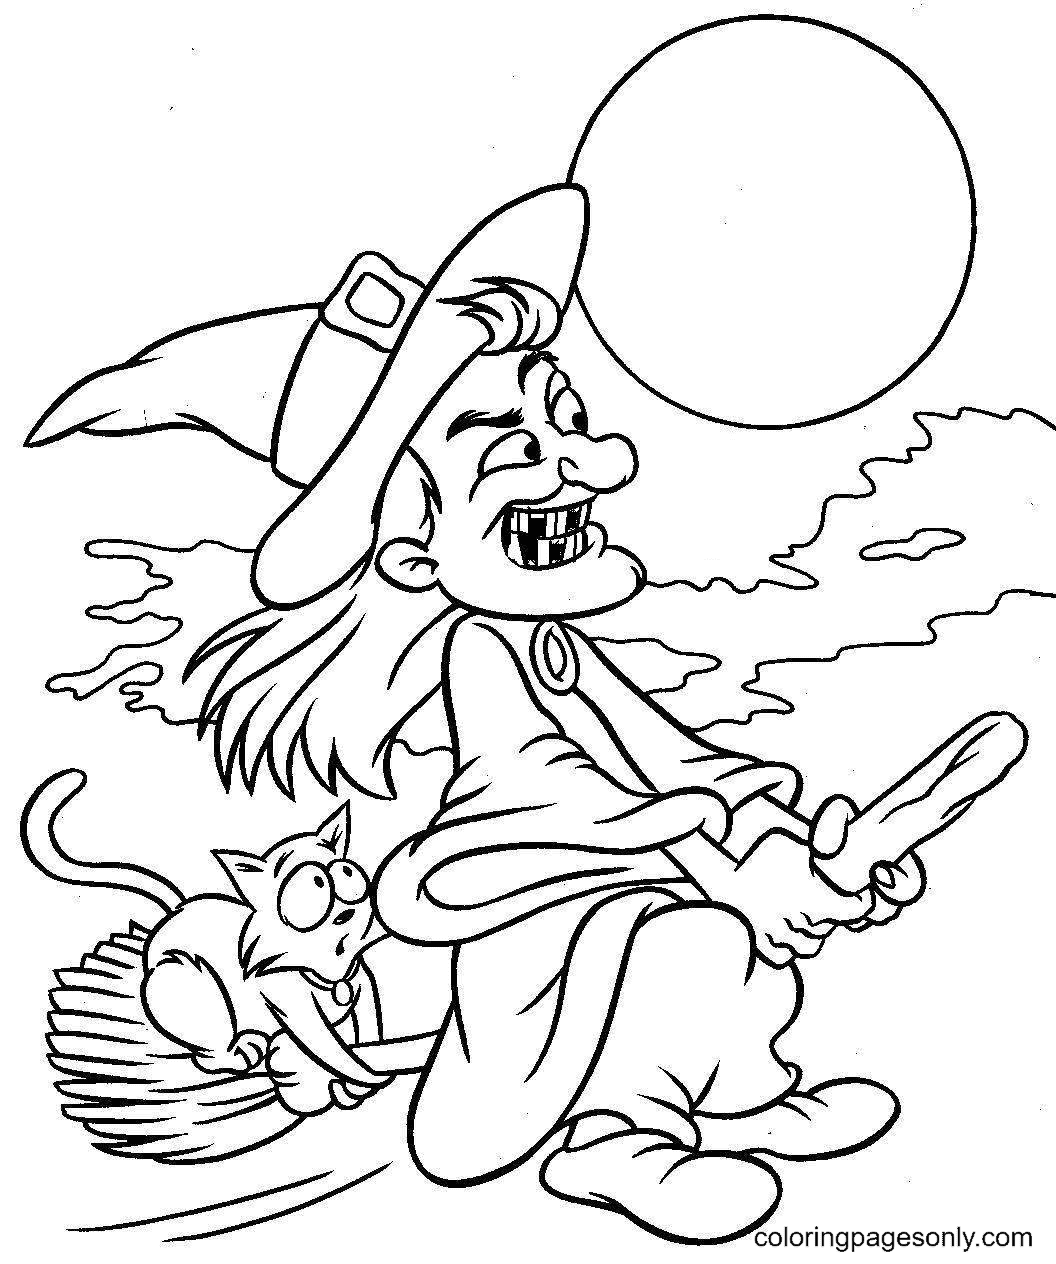 The Witch and The Black Cat on the Flying Broom Coloring Page